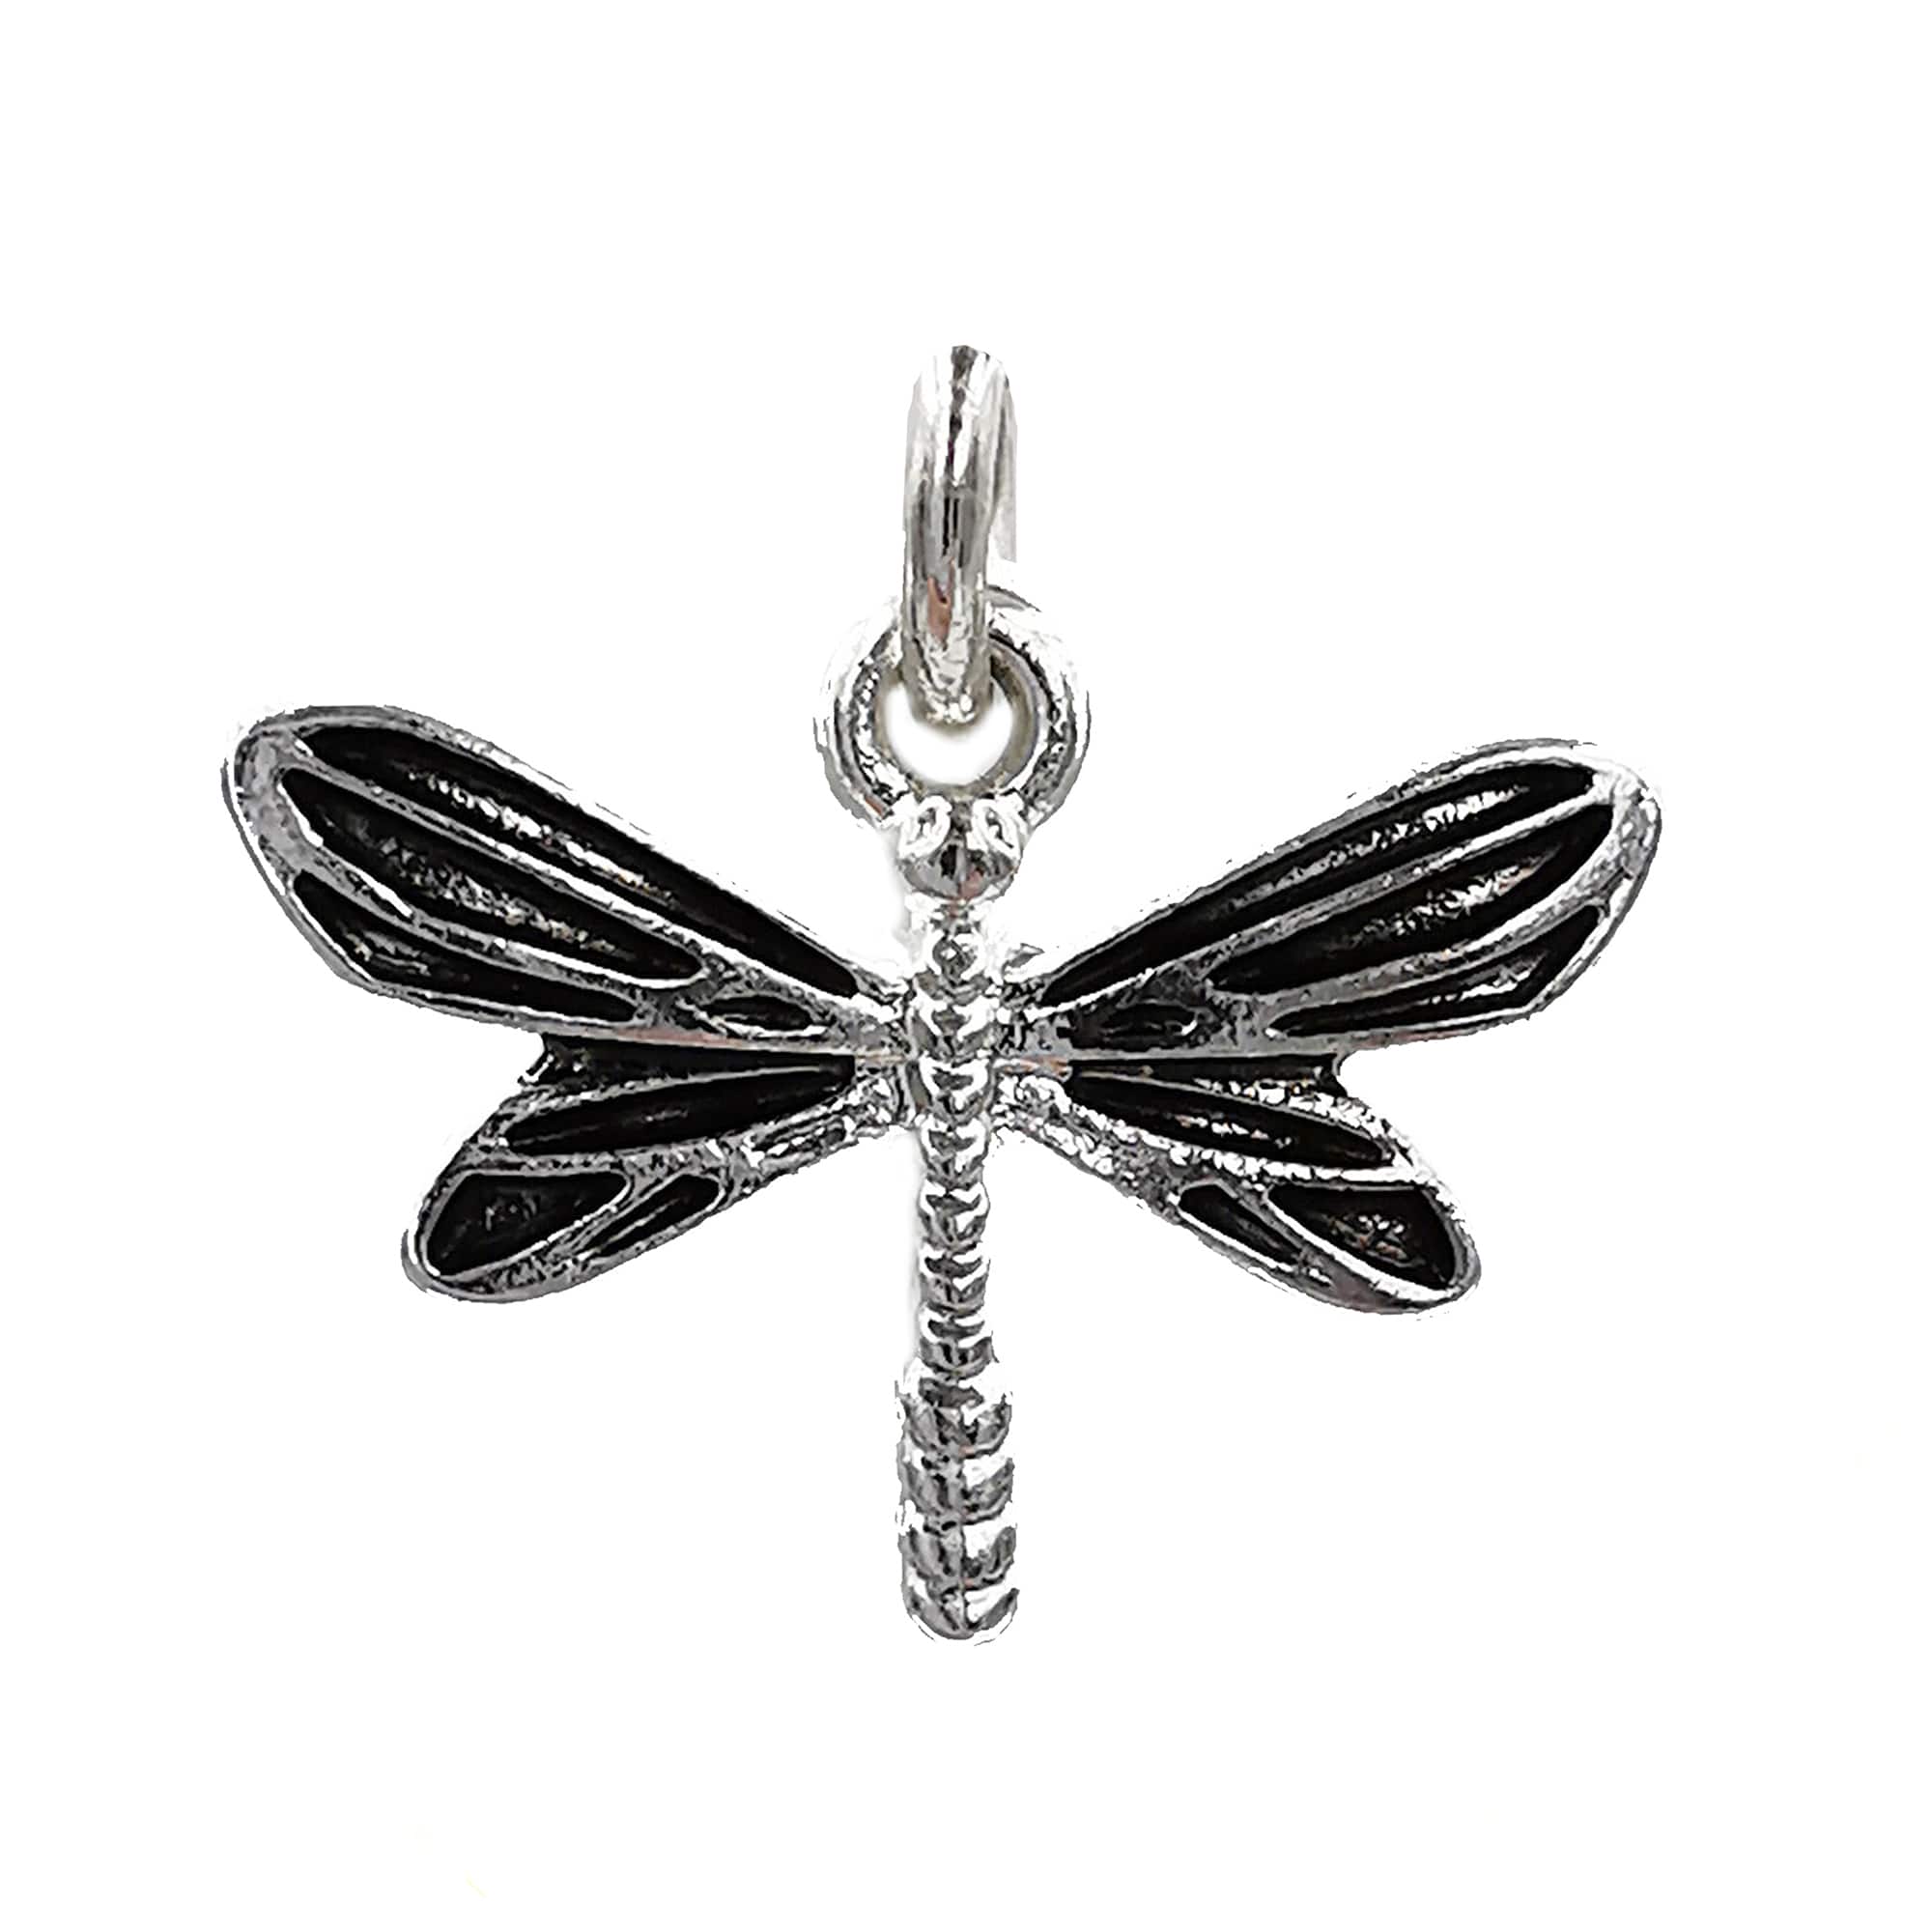 Charmed Craft Dangle Dragonfly Charm Beads for Charm Bracelets